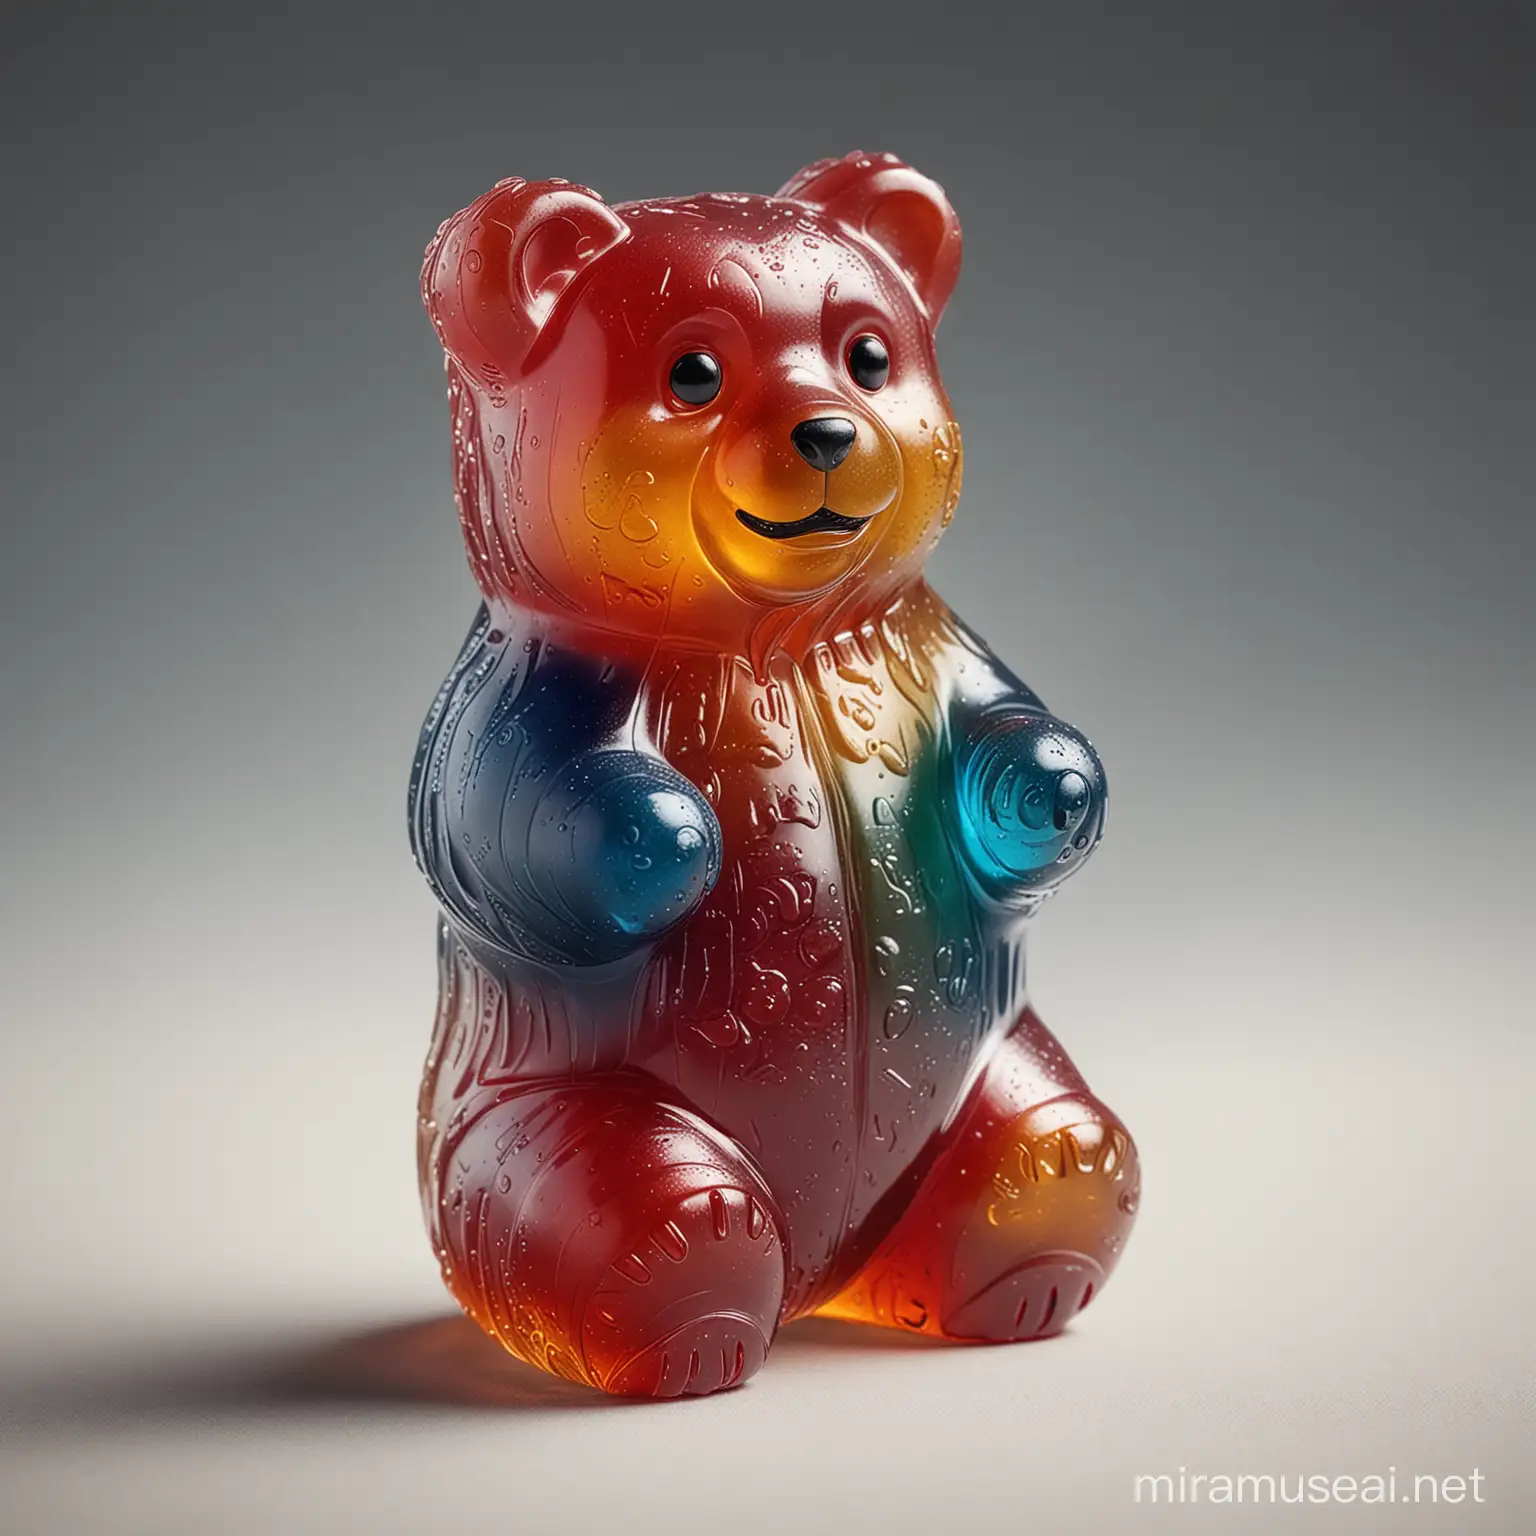 hyper-realistic, detailed image of a colourful gummy bear. cinematic and dramatic pose.

